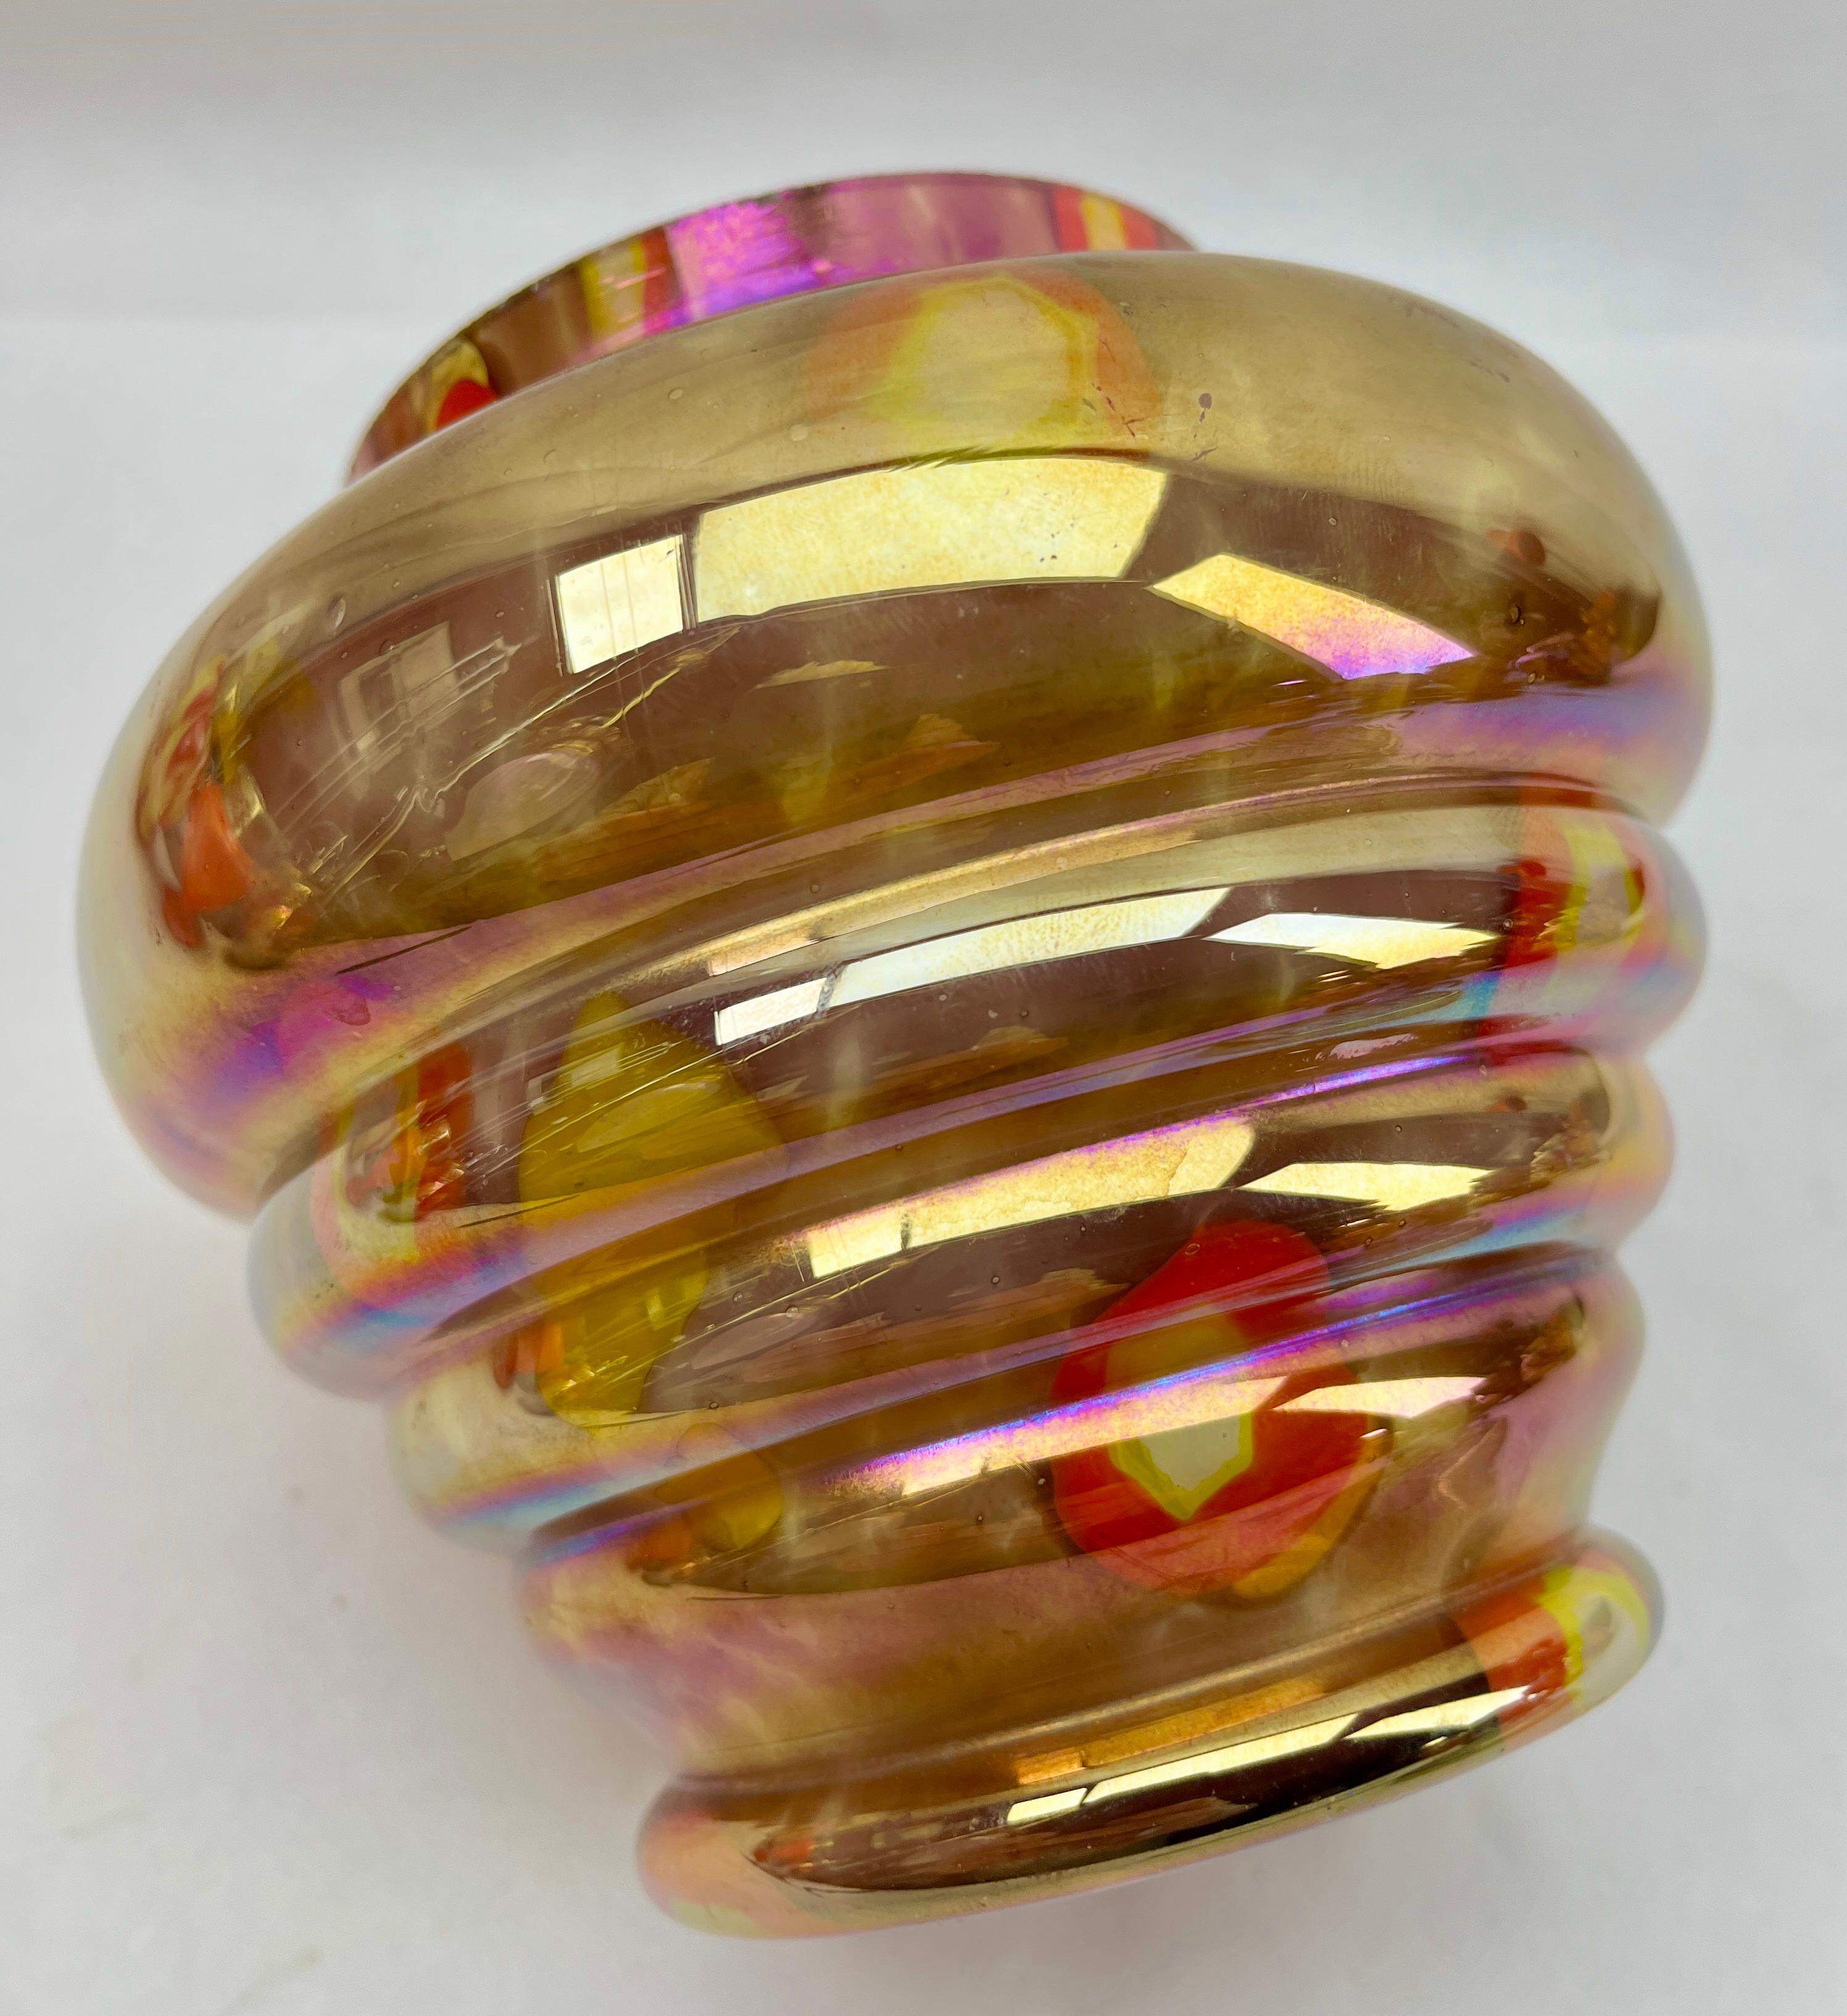 Hand-Crafted 'Pique Fleurs' Iridescent Glass Vase, in Multi Color Decor with Grille, 1930s  For Sale